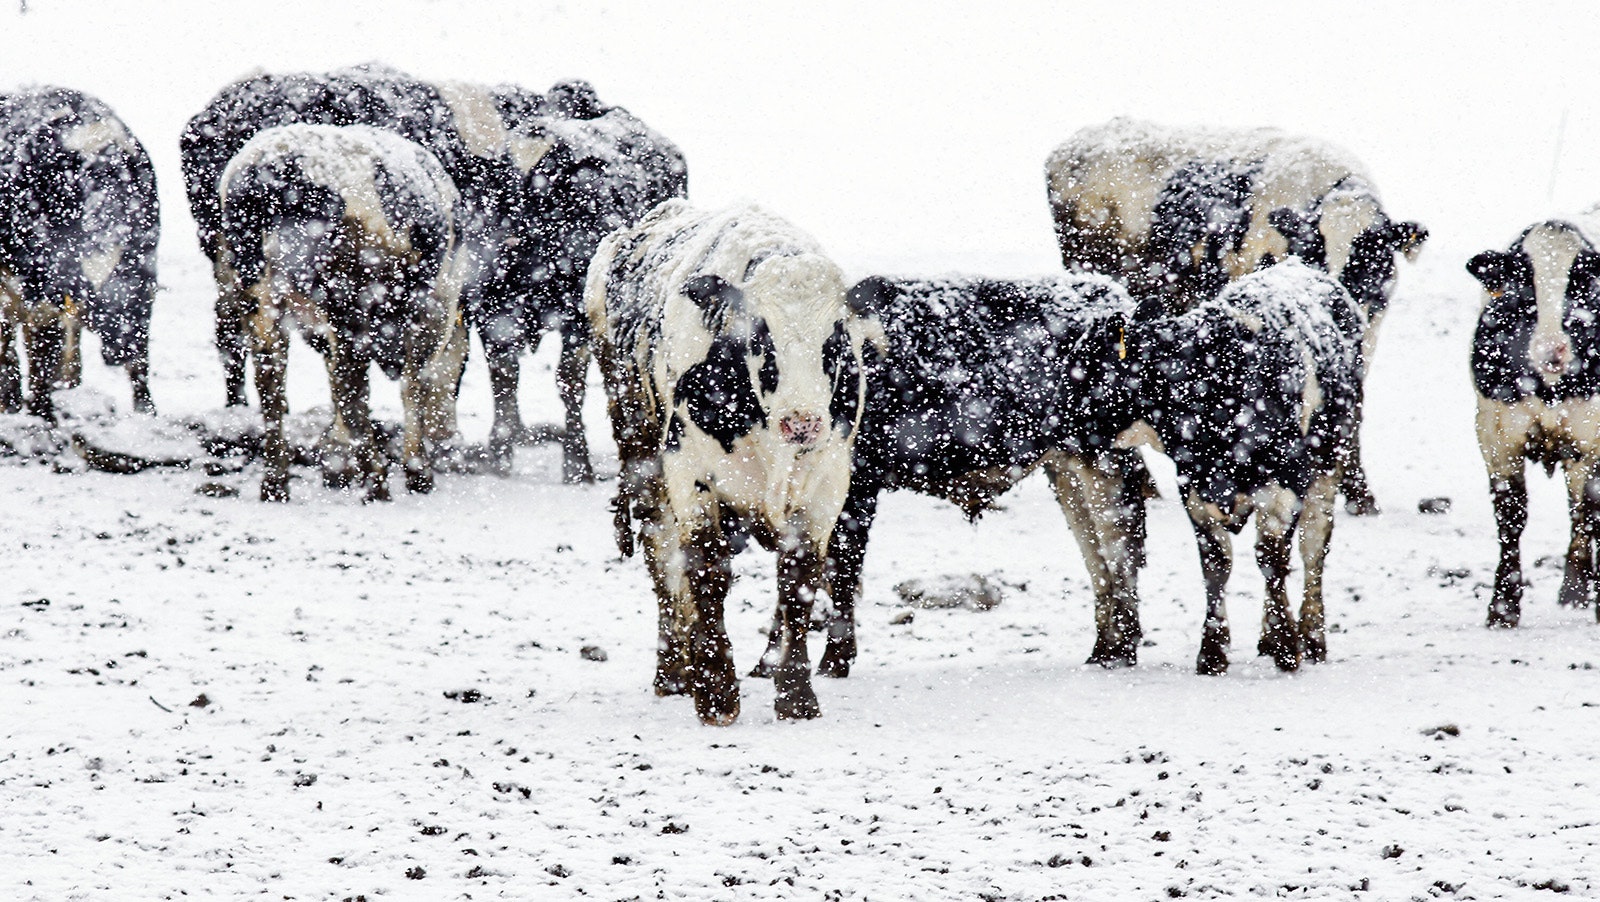 Cattle in snow 12 22 22